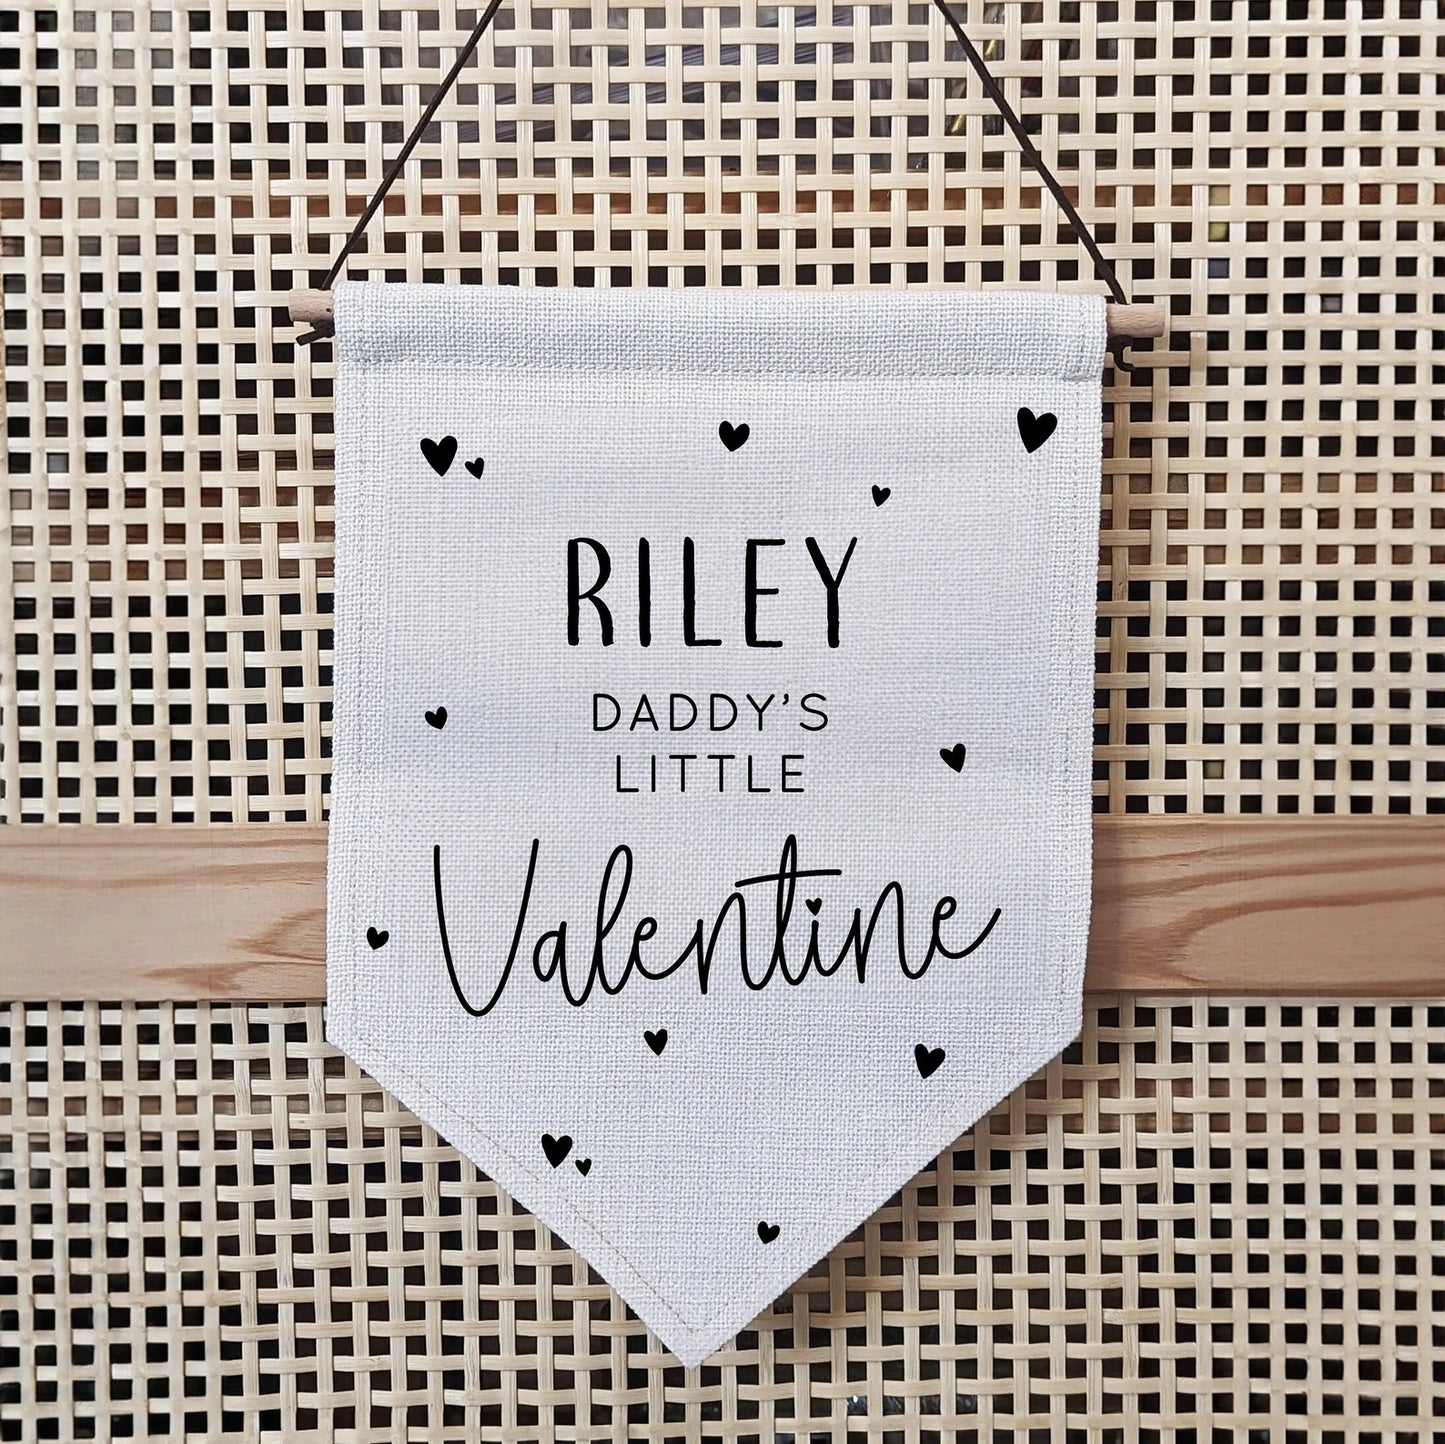 Personalised Mummy's or Daddy's Little Valentine Linen Flag, Love Hearts